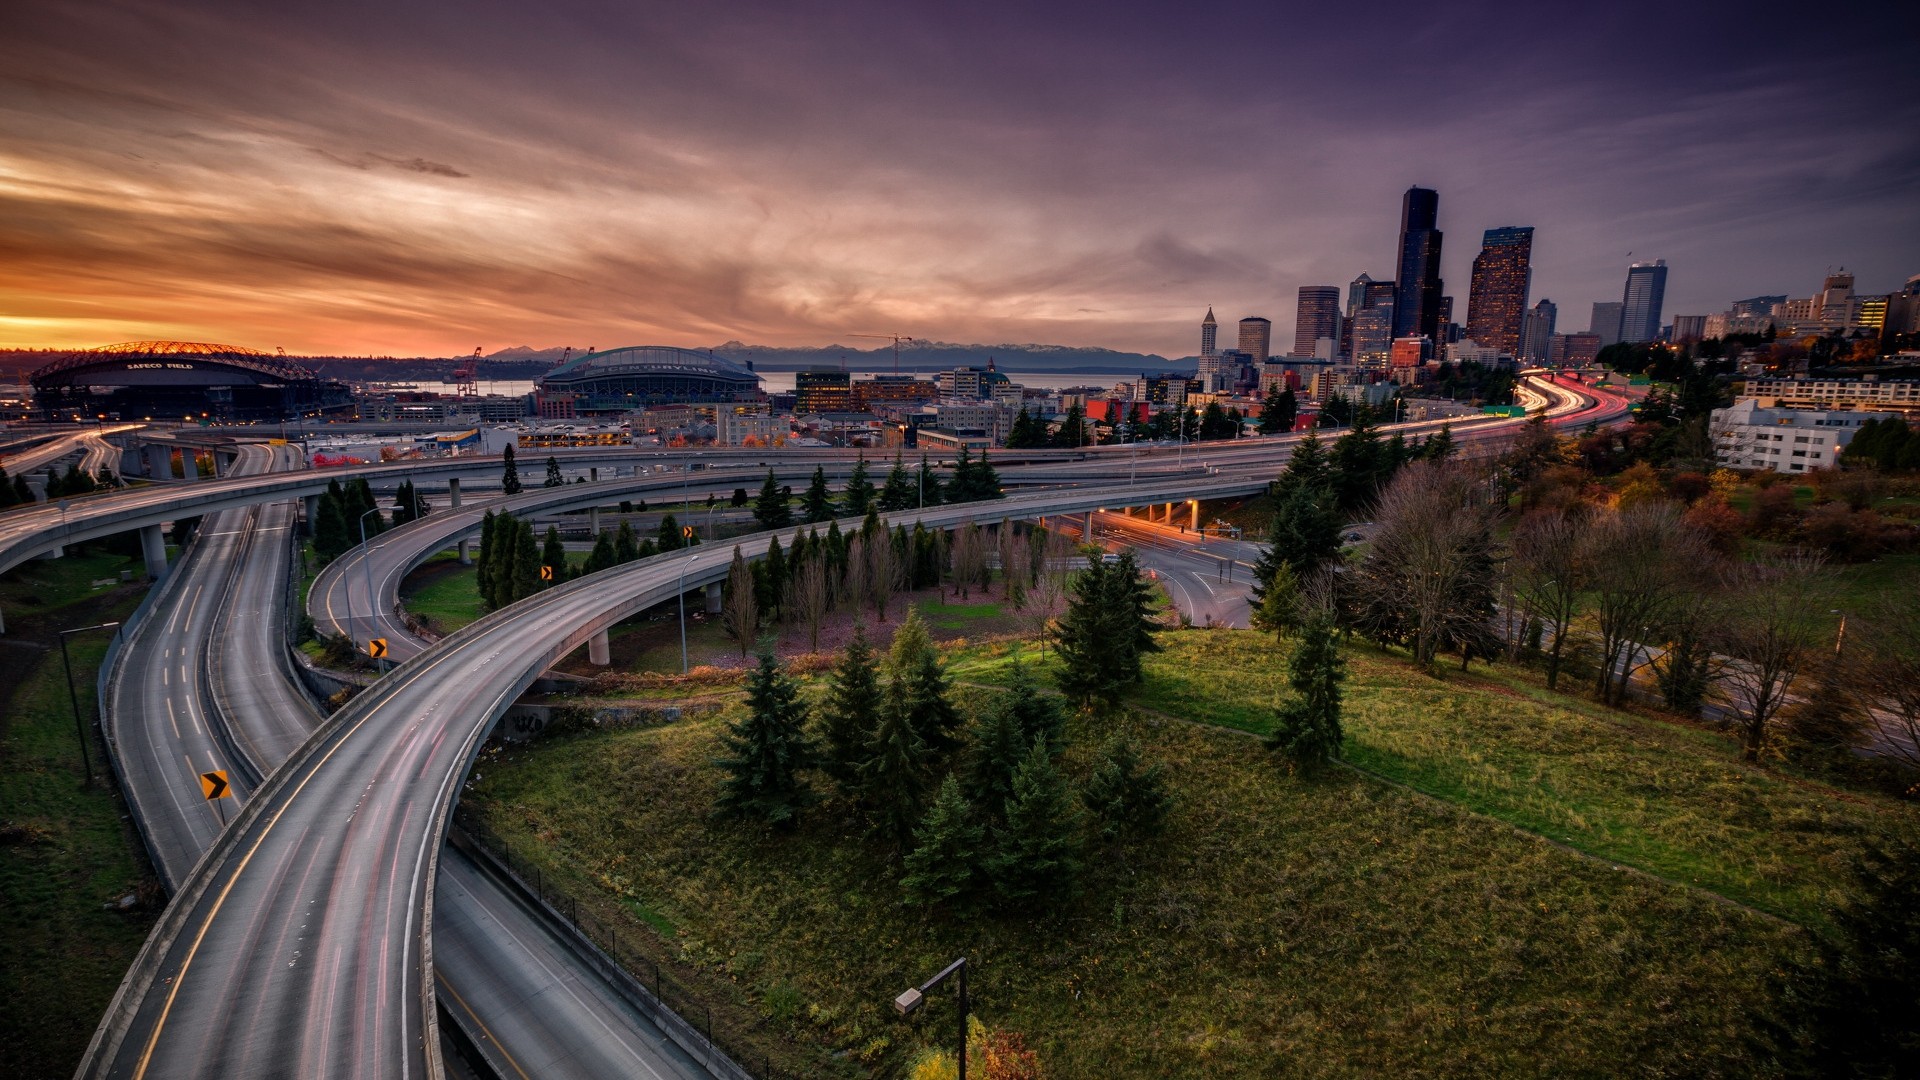 General 1920x1080 cityscape architecture road building skyscraper clouds highway trees evening sunset grass street light trails long exposure cranes (machine) stadium Seattle USA interchange overpass Washington (state) intersections